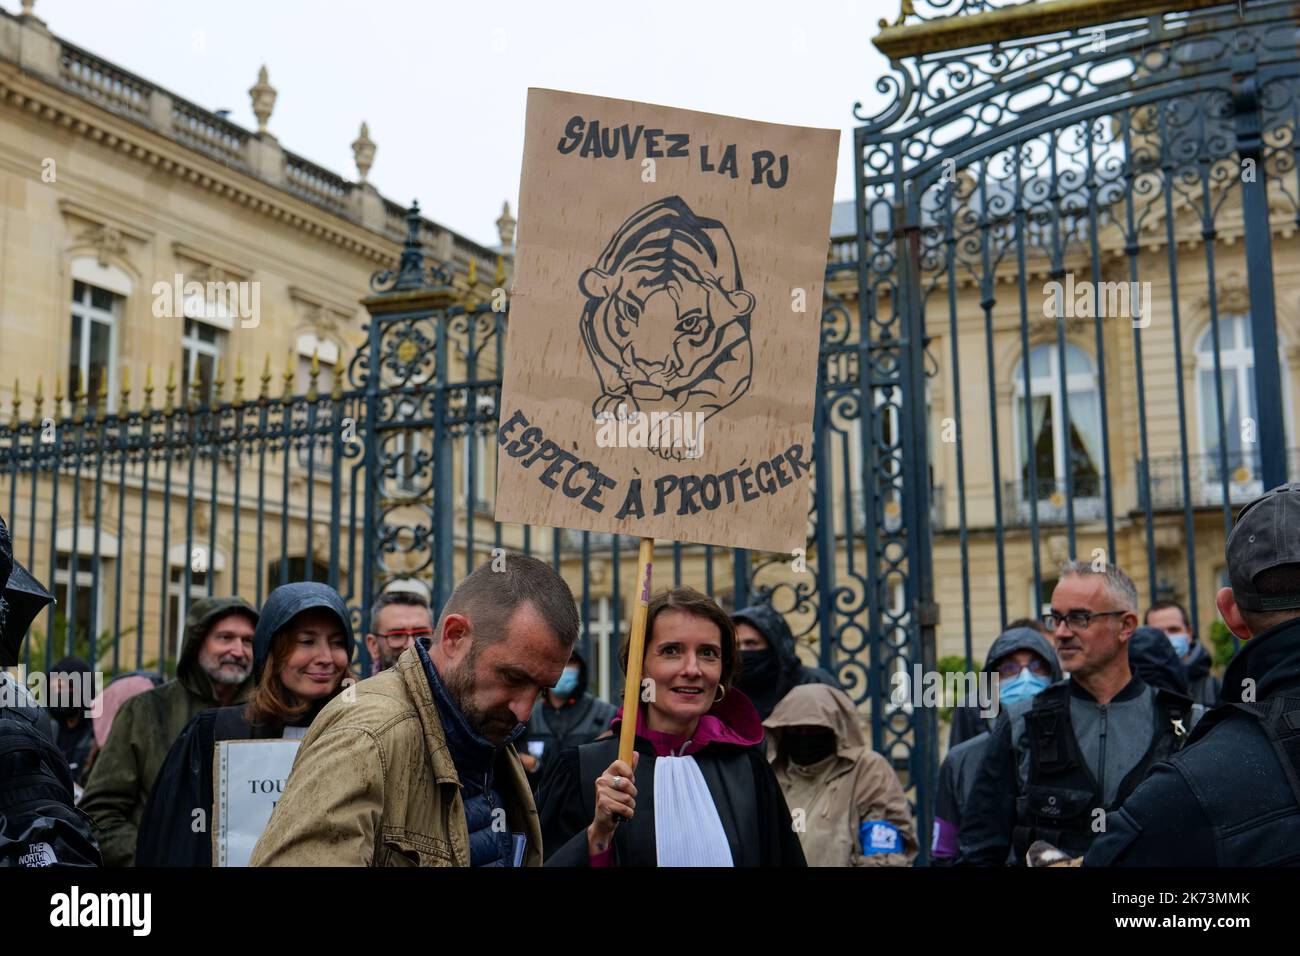 Versailles, France, 17/10/2022. Police officers, judges and lowyers demonstrate against the government bill that wants to reform the judicial police. Pierre Galan/Alamy Live News Stock Photo